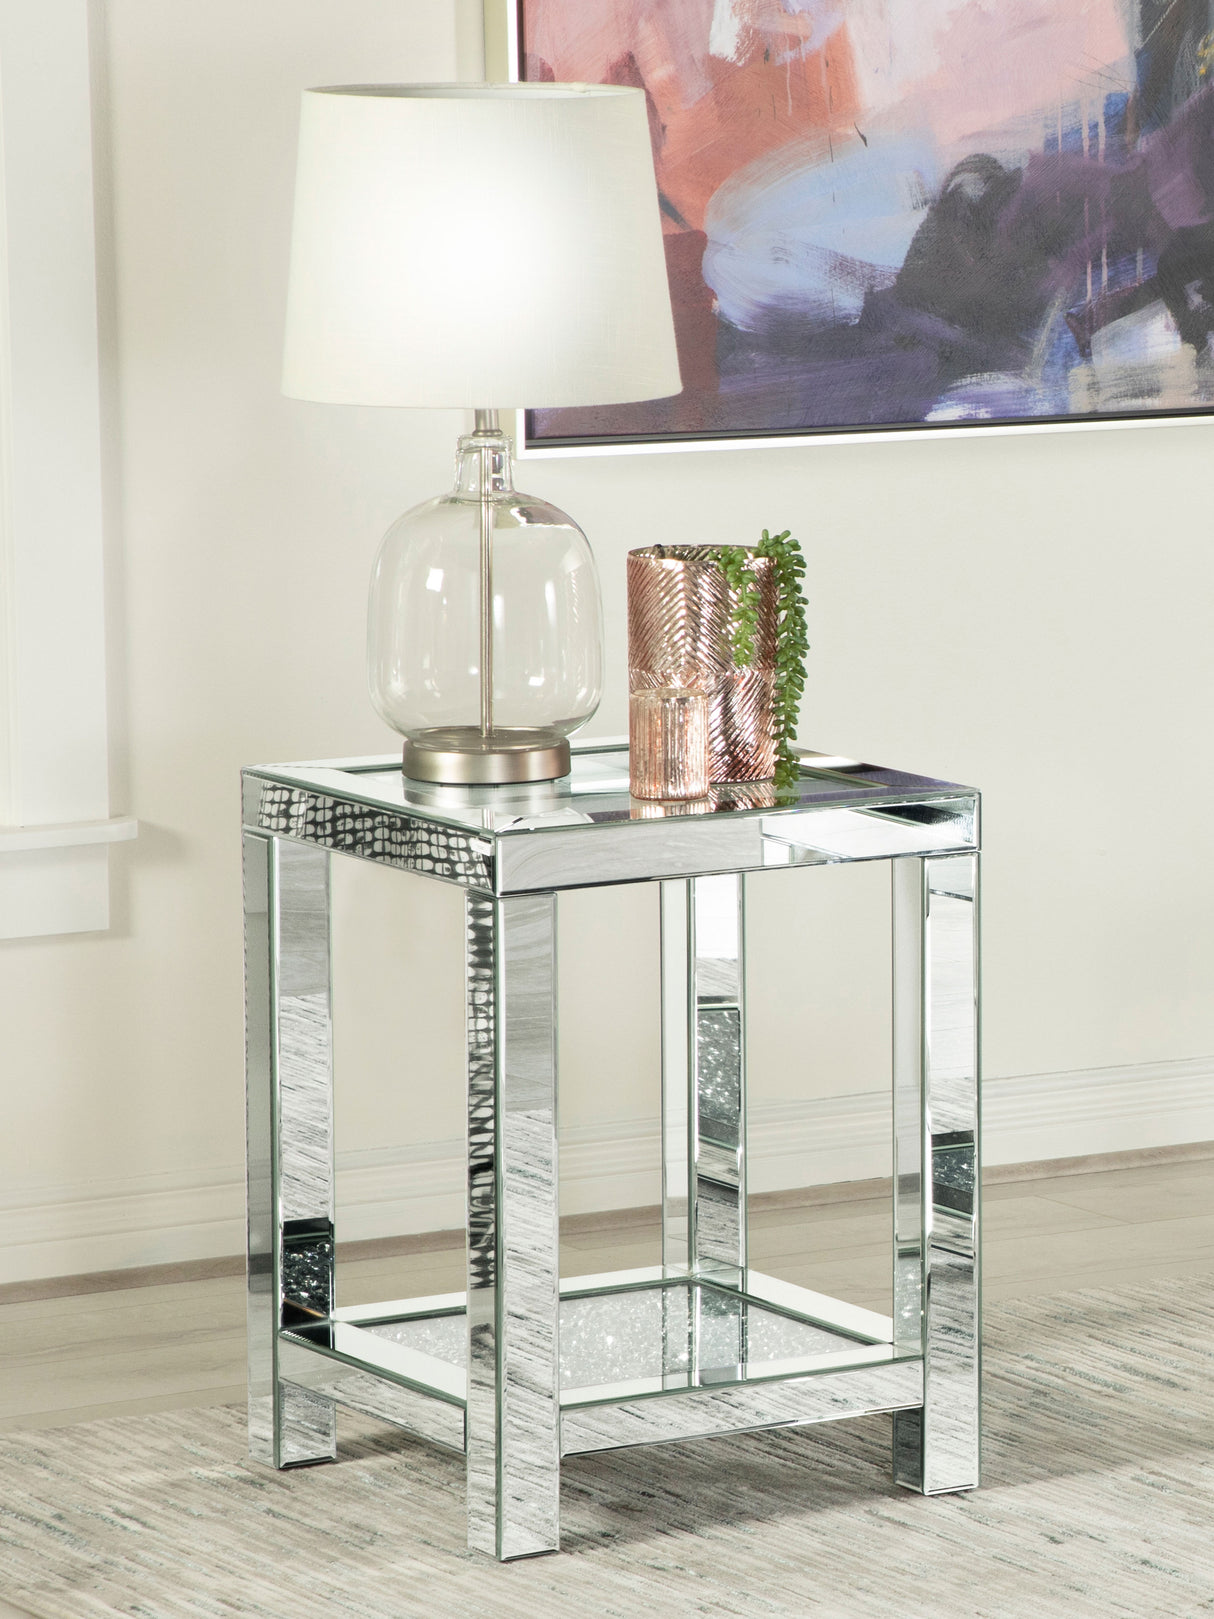 End Table - Valentina Square End Table with Glass Top Mirror